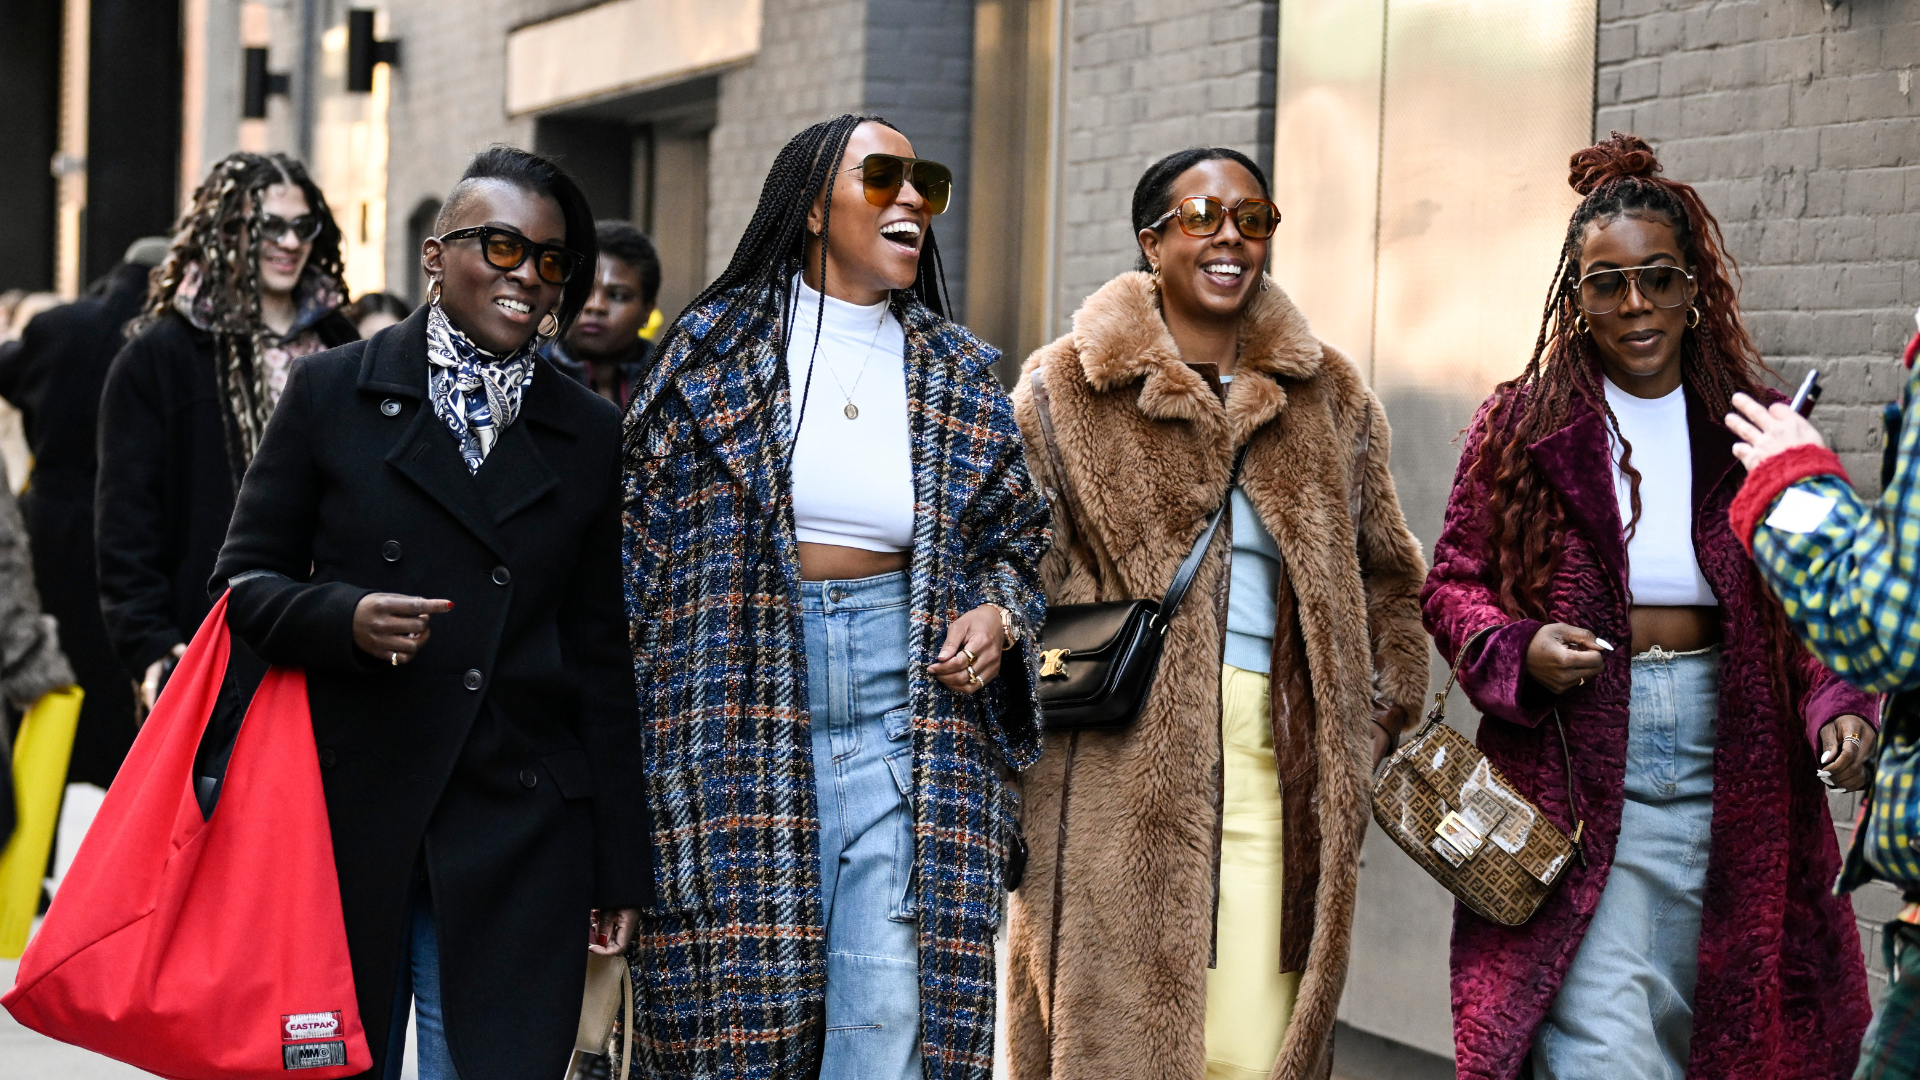 HBCU Homecoming Season Has Arrived–Here’s 5 Editor-Approved Looks For Inspiration